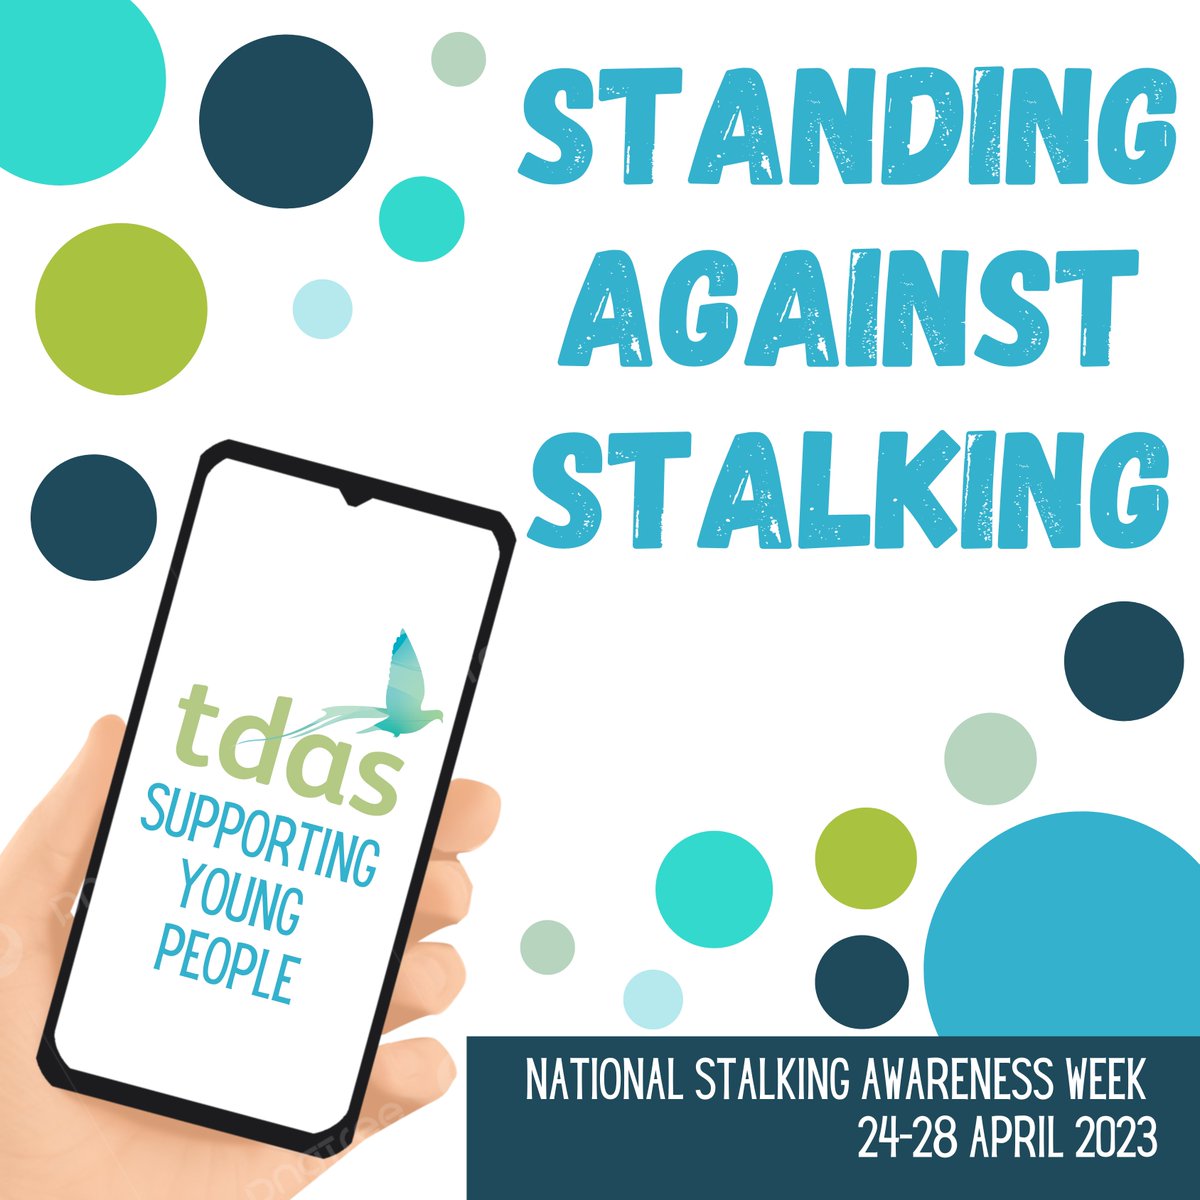 It's National Stalking Awareness Week 2023, and the theme is Standing Against Stalking, standing together with young people to support them to recognise stalking and access specialist support. 

#NSAW2023 #StandingAgainstStalking